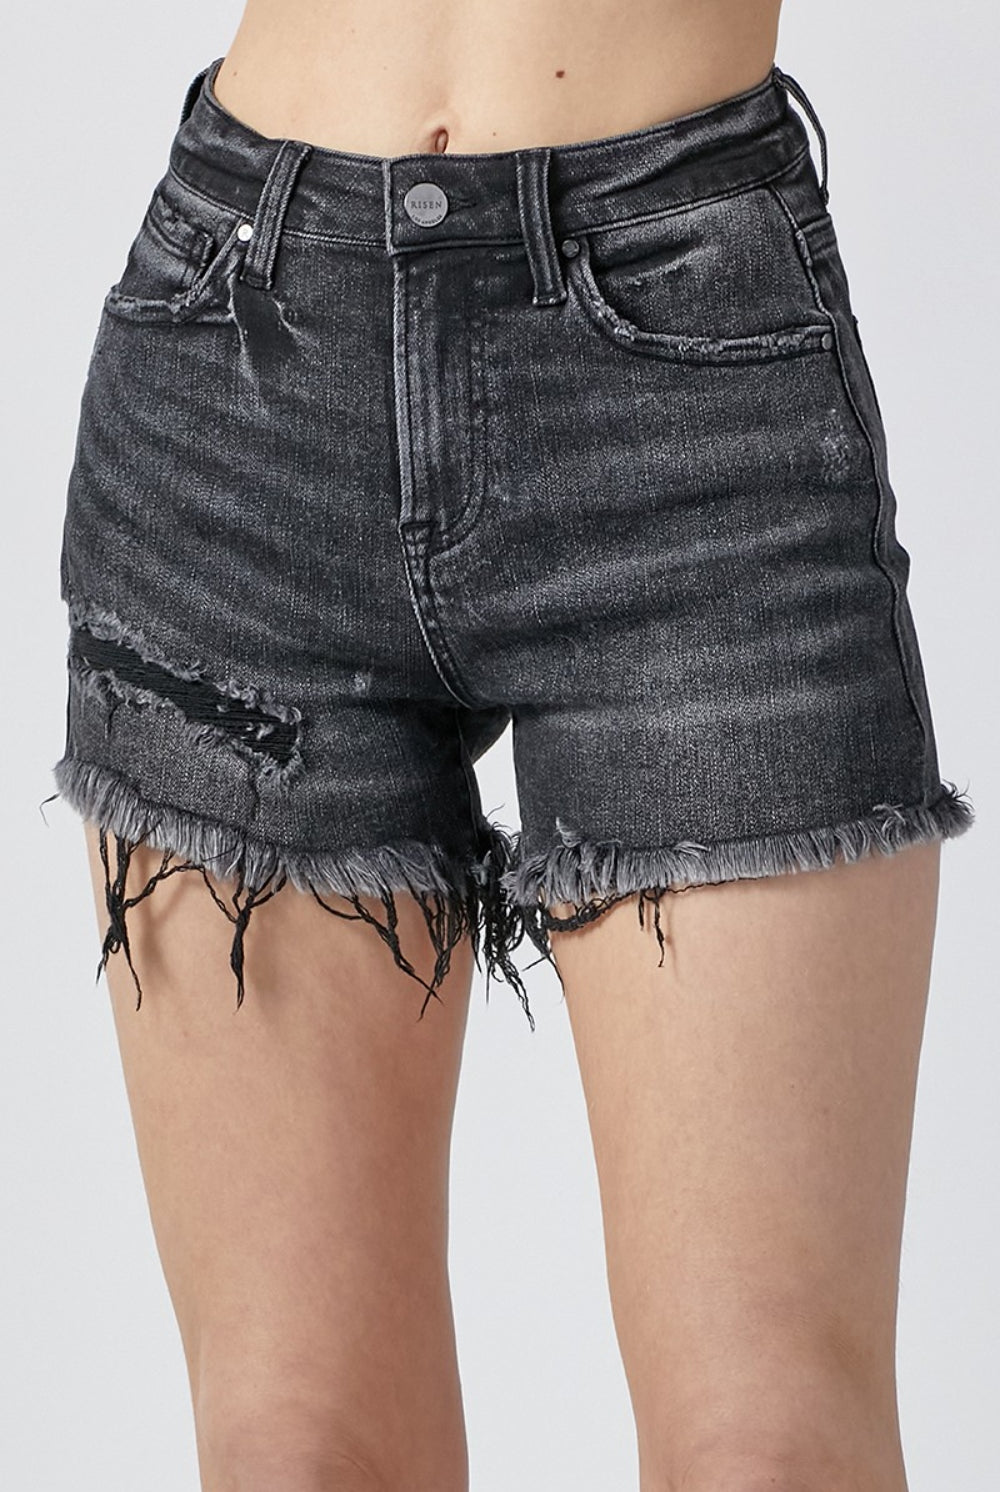 Woman wearing trendy black denim shorts with a frayed hem, perfect for casual summer days.